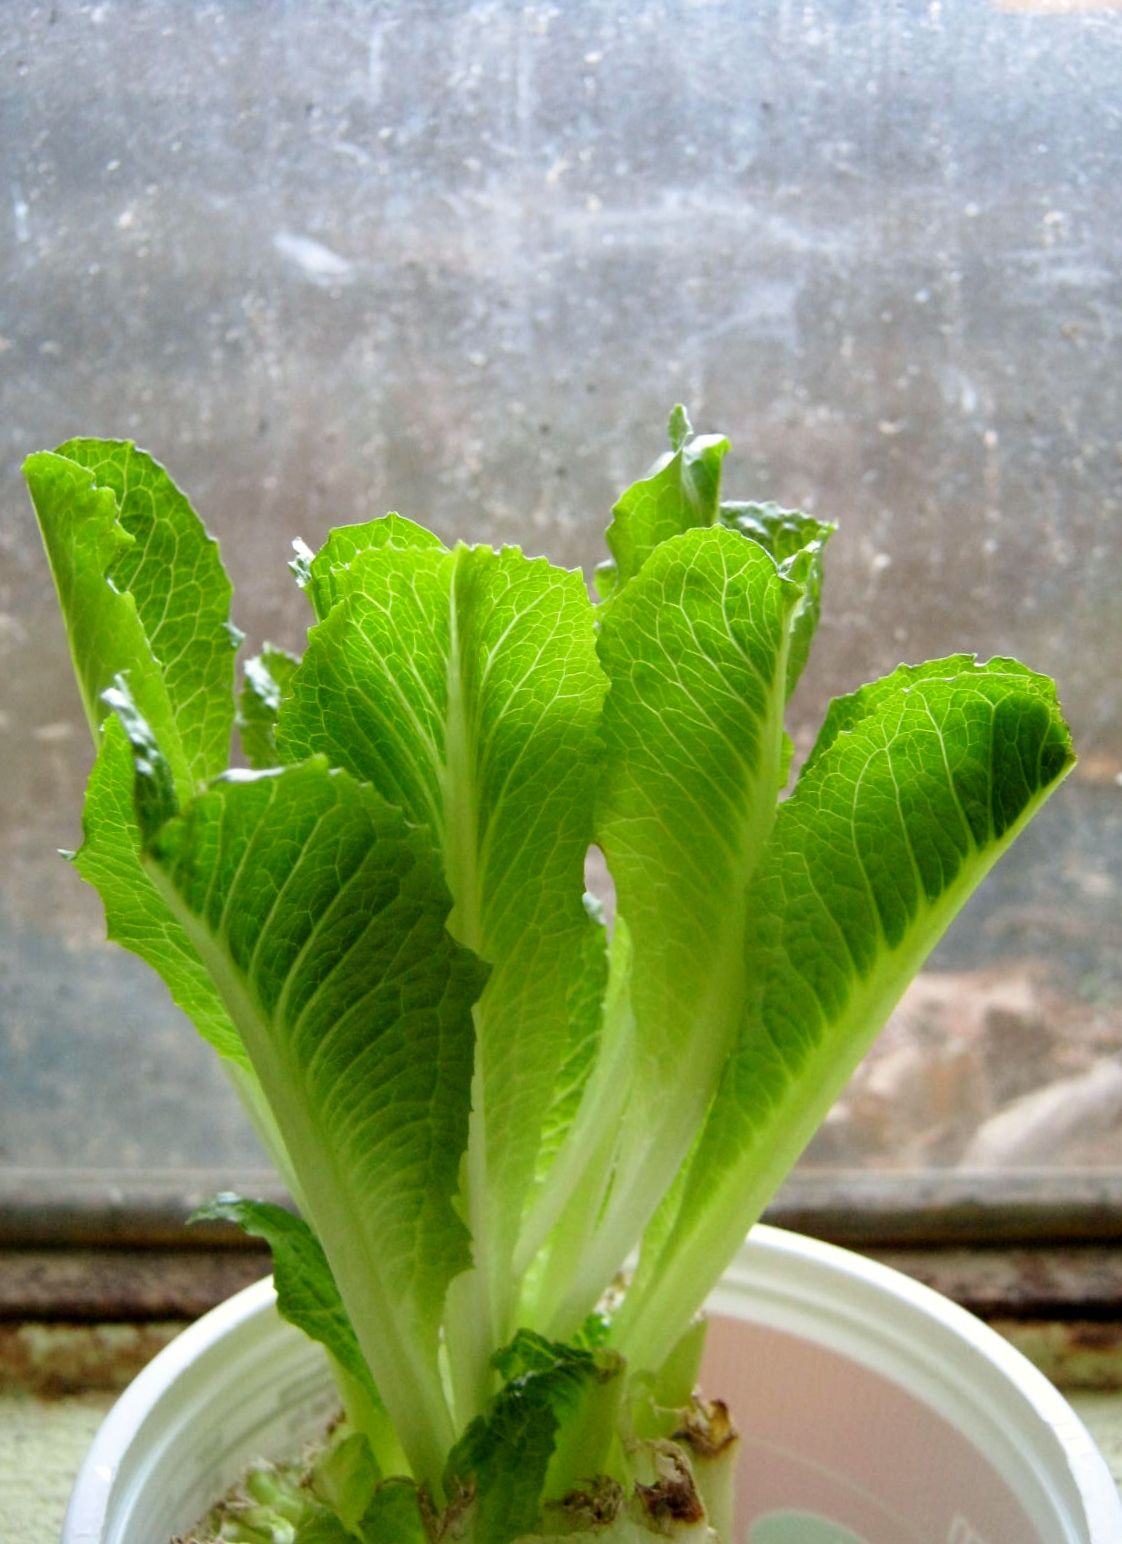 Regrowing Romaine from Grocery Store Leftovers